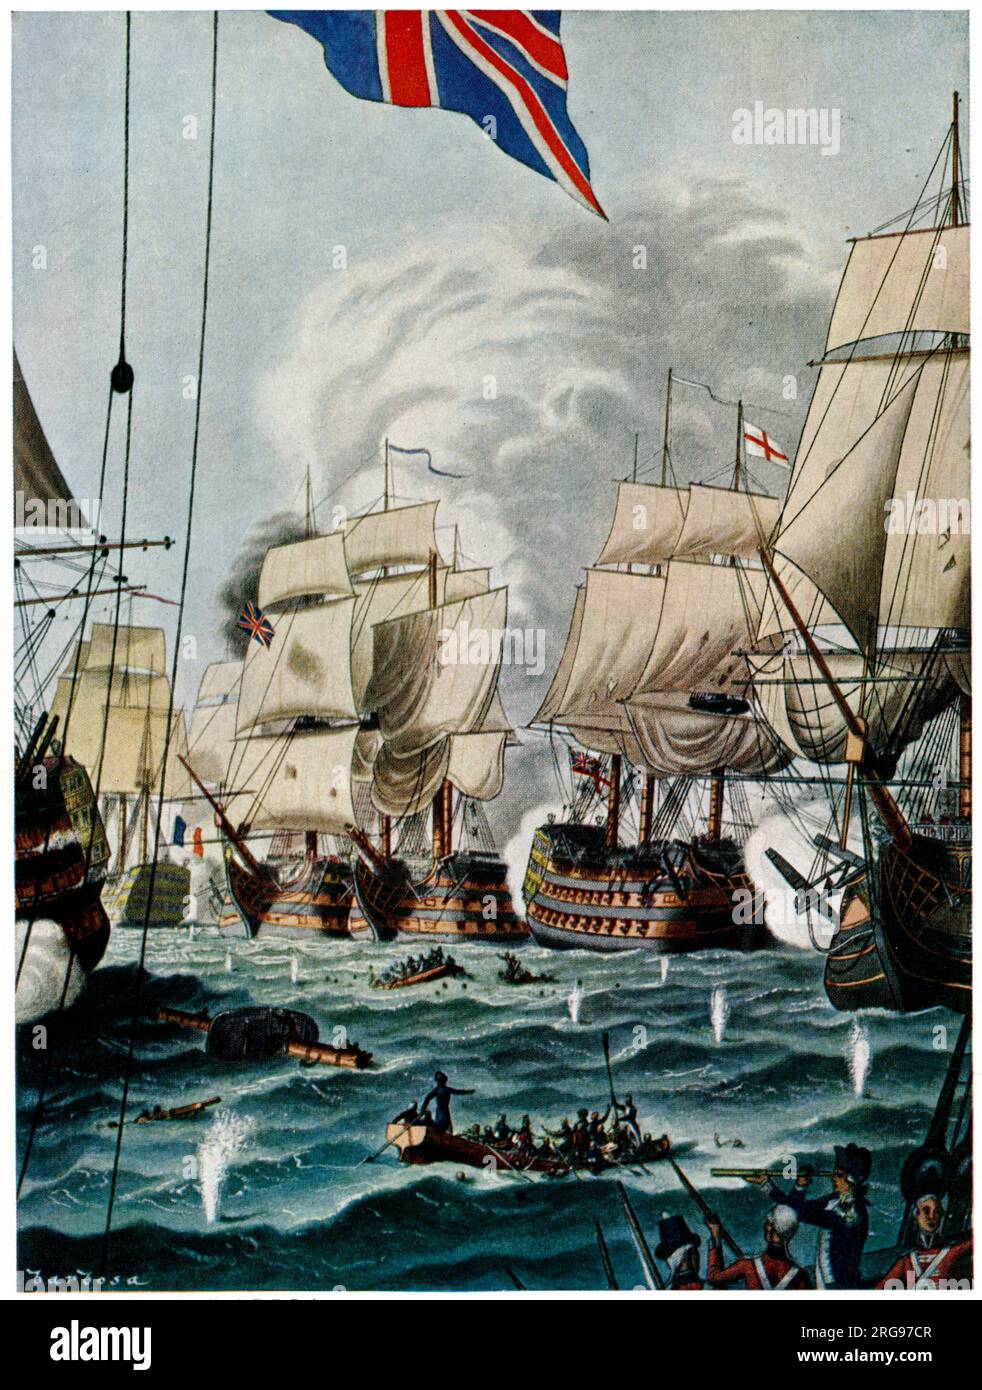 Scene from the Battle of Trafalgar (21 October 1805), Cape Trafalgar, Spain, fought by the British Royal Navy against the combined fleets of the French and Spanish Navies. Stock Photo